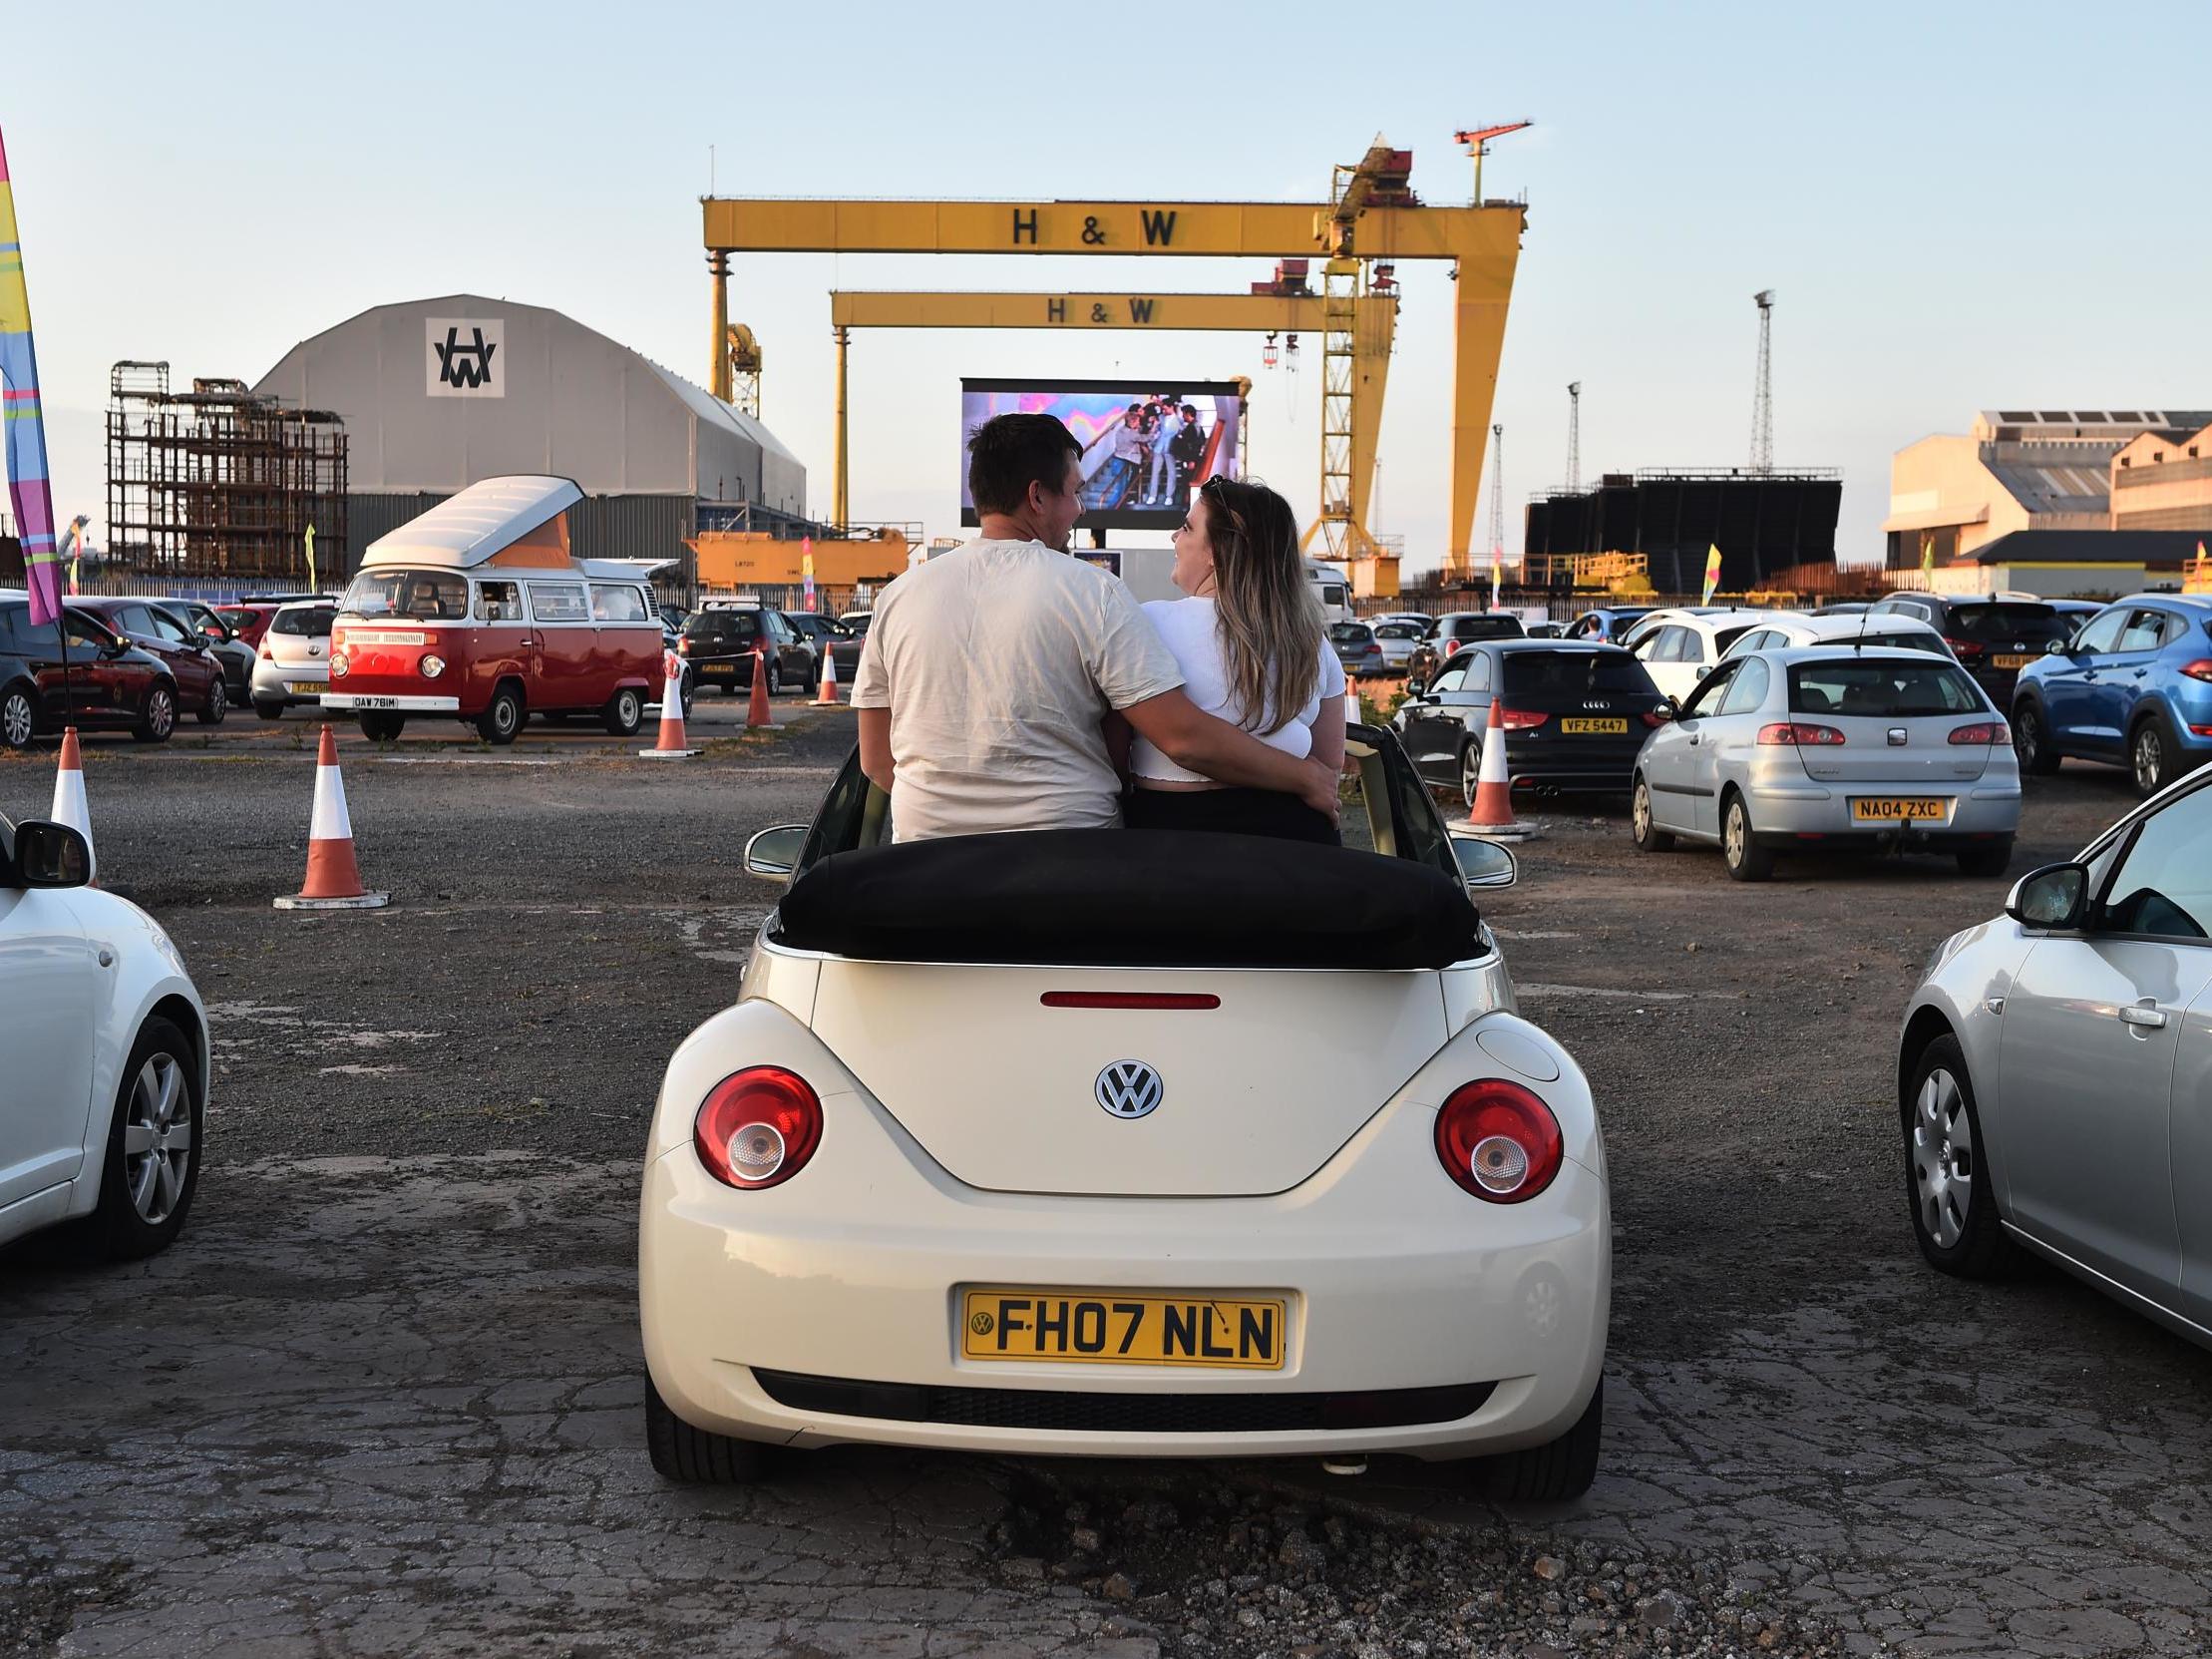 Movie goers watch ‘Grease’ on the big screen in the Titanic Quarter in Belfast